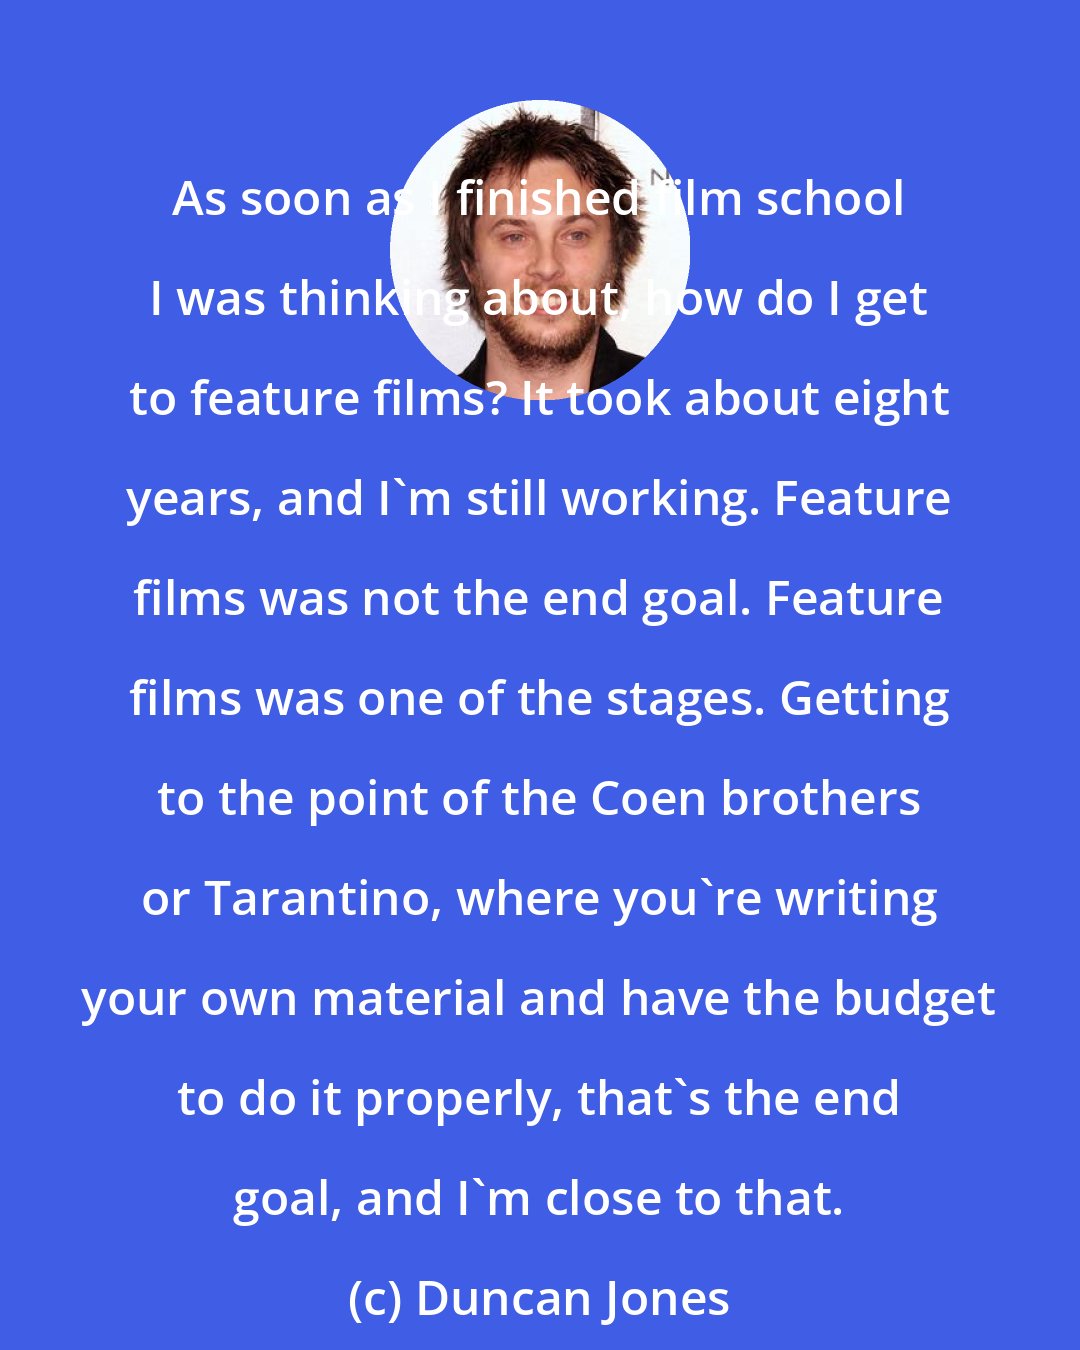 Duncan Jones: As soon as I finished film school I was thinking about, how do I get to feature films? It took about eight years, and I'm still working. Feature films was not the end goal. Feature films was one of the stages. Getting to the point of the Coen brothers or Tarantino, where you're writing your own material and have the budget to do it properly, that's the end goal, and I'm close to that.